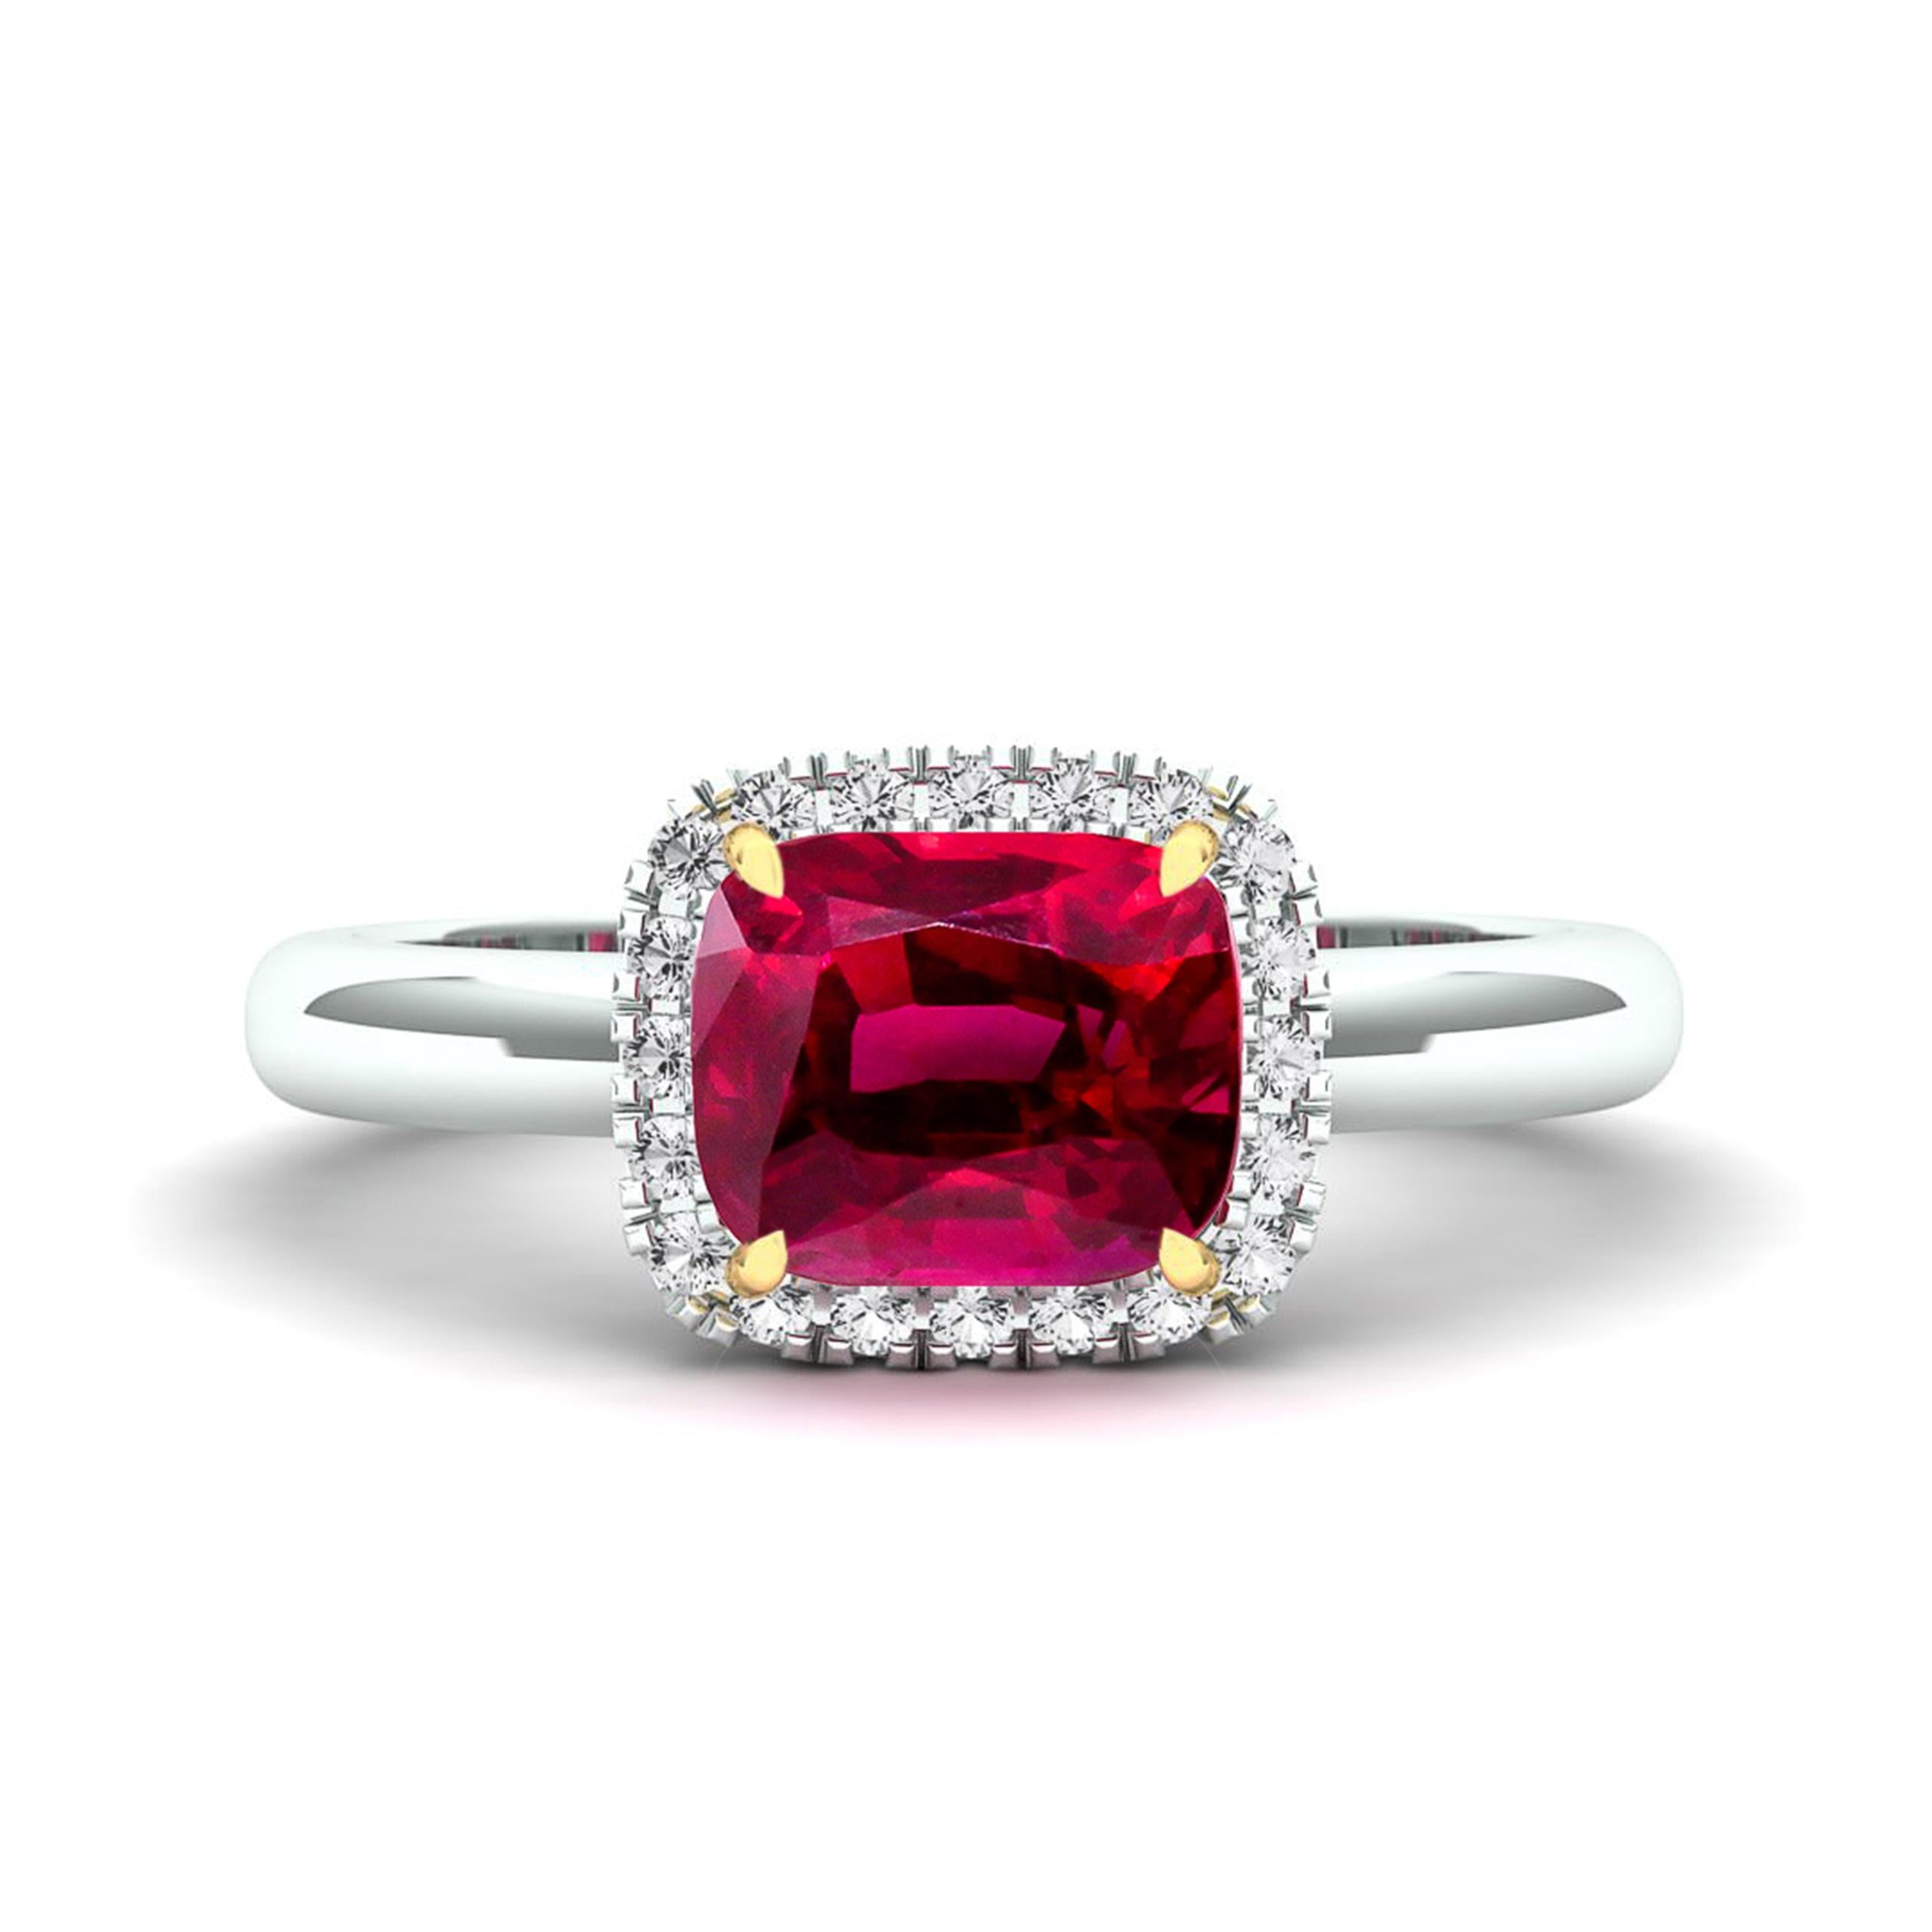 Elevate your style with our custom-made ring, featuring a 1.55-carat natural untreated Ruby in a cushion cut. Set in an East-West halo setting with conflict-free diamonds. Certified by Emteem Gem Labs, it's available in your choice of 18K yellow